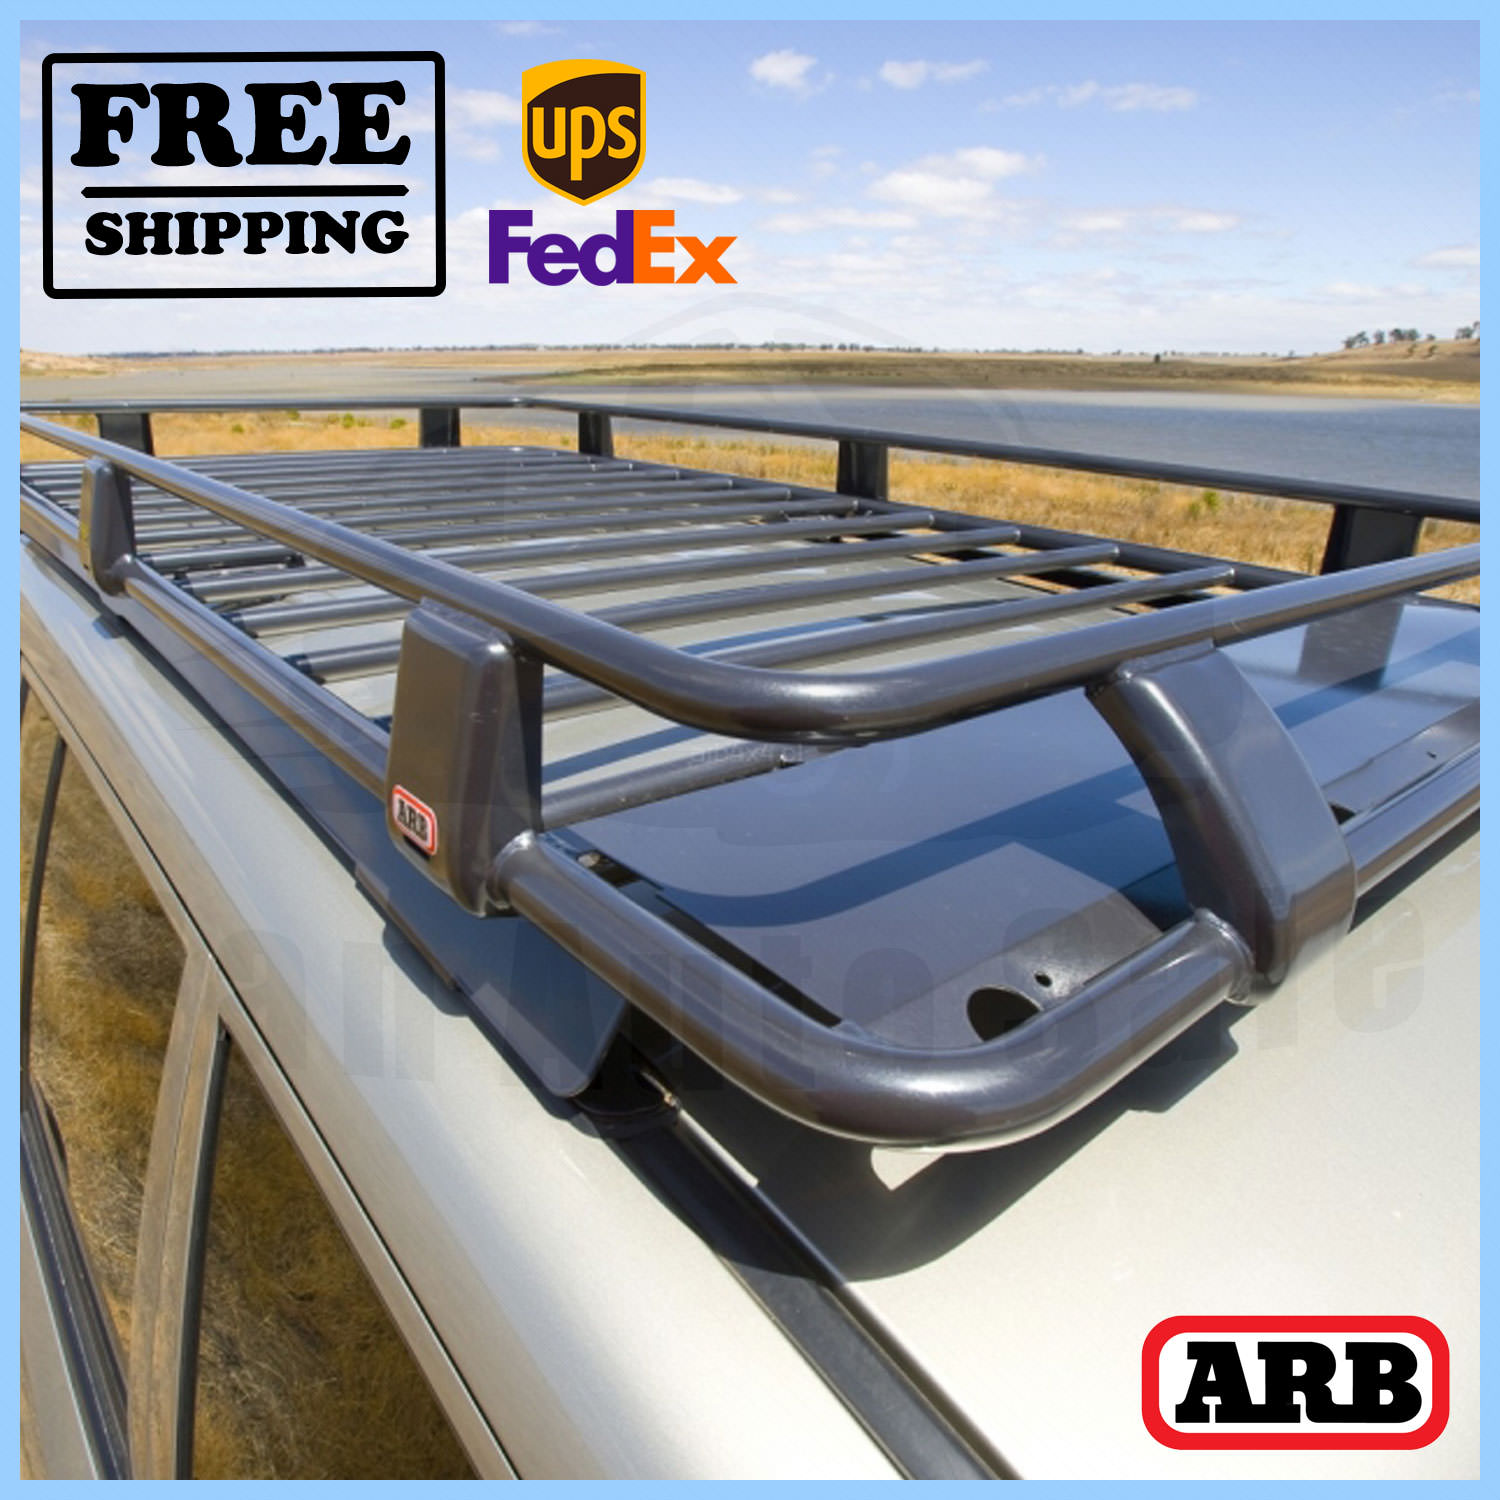 Roof Rack ARB fits with Toyota Land Cruiser 198097 eBay